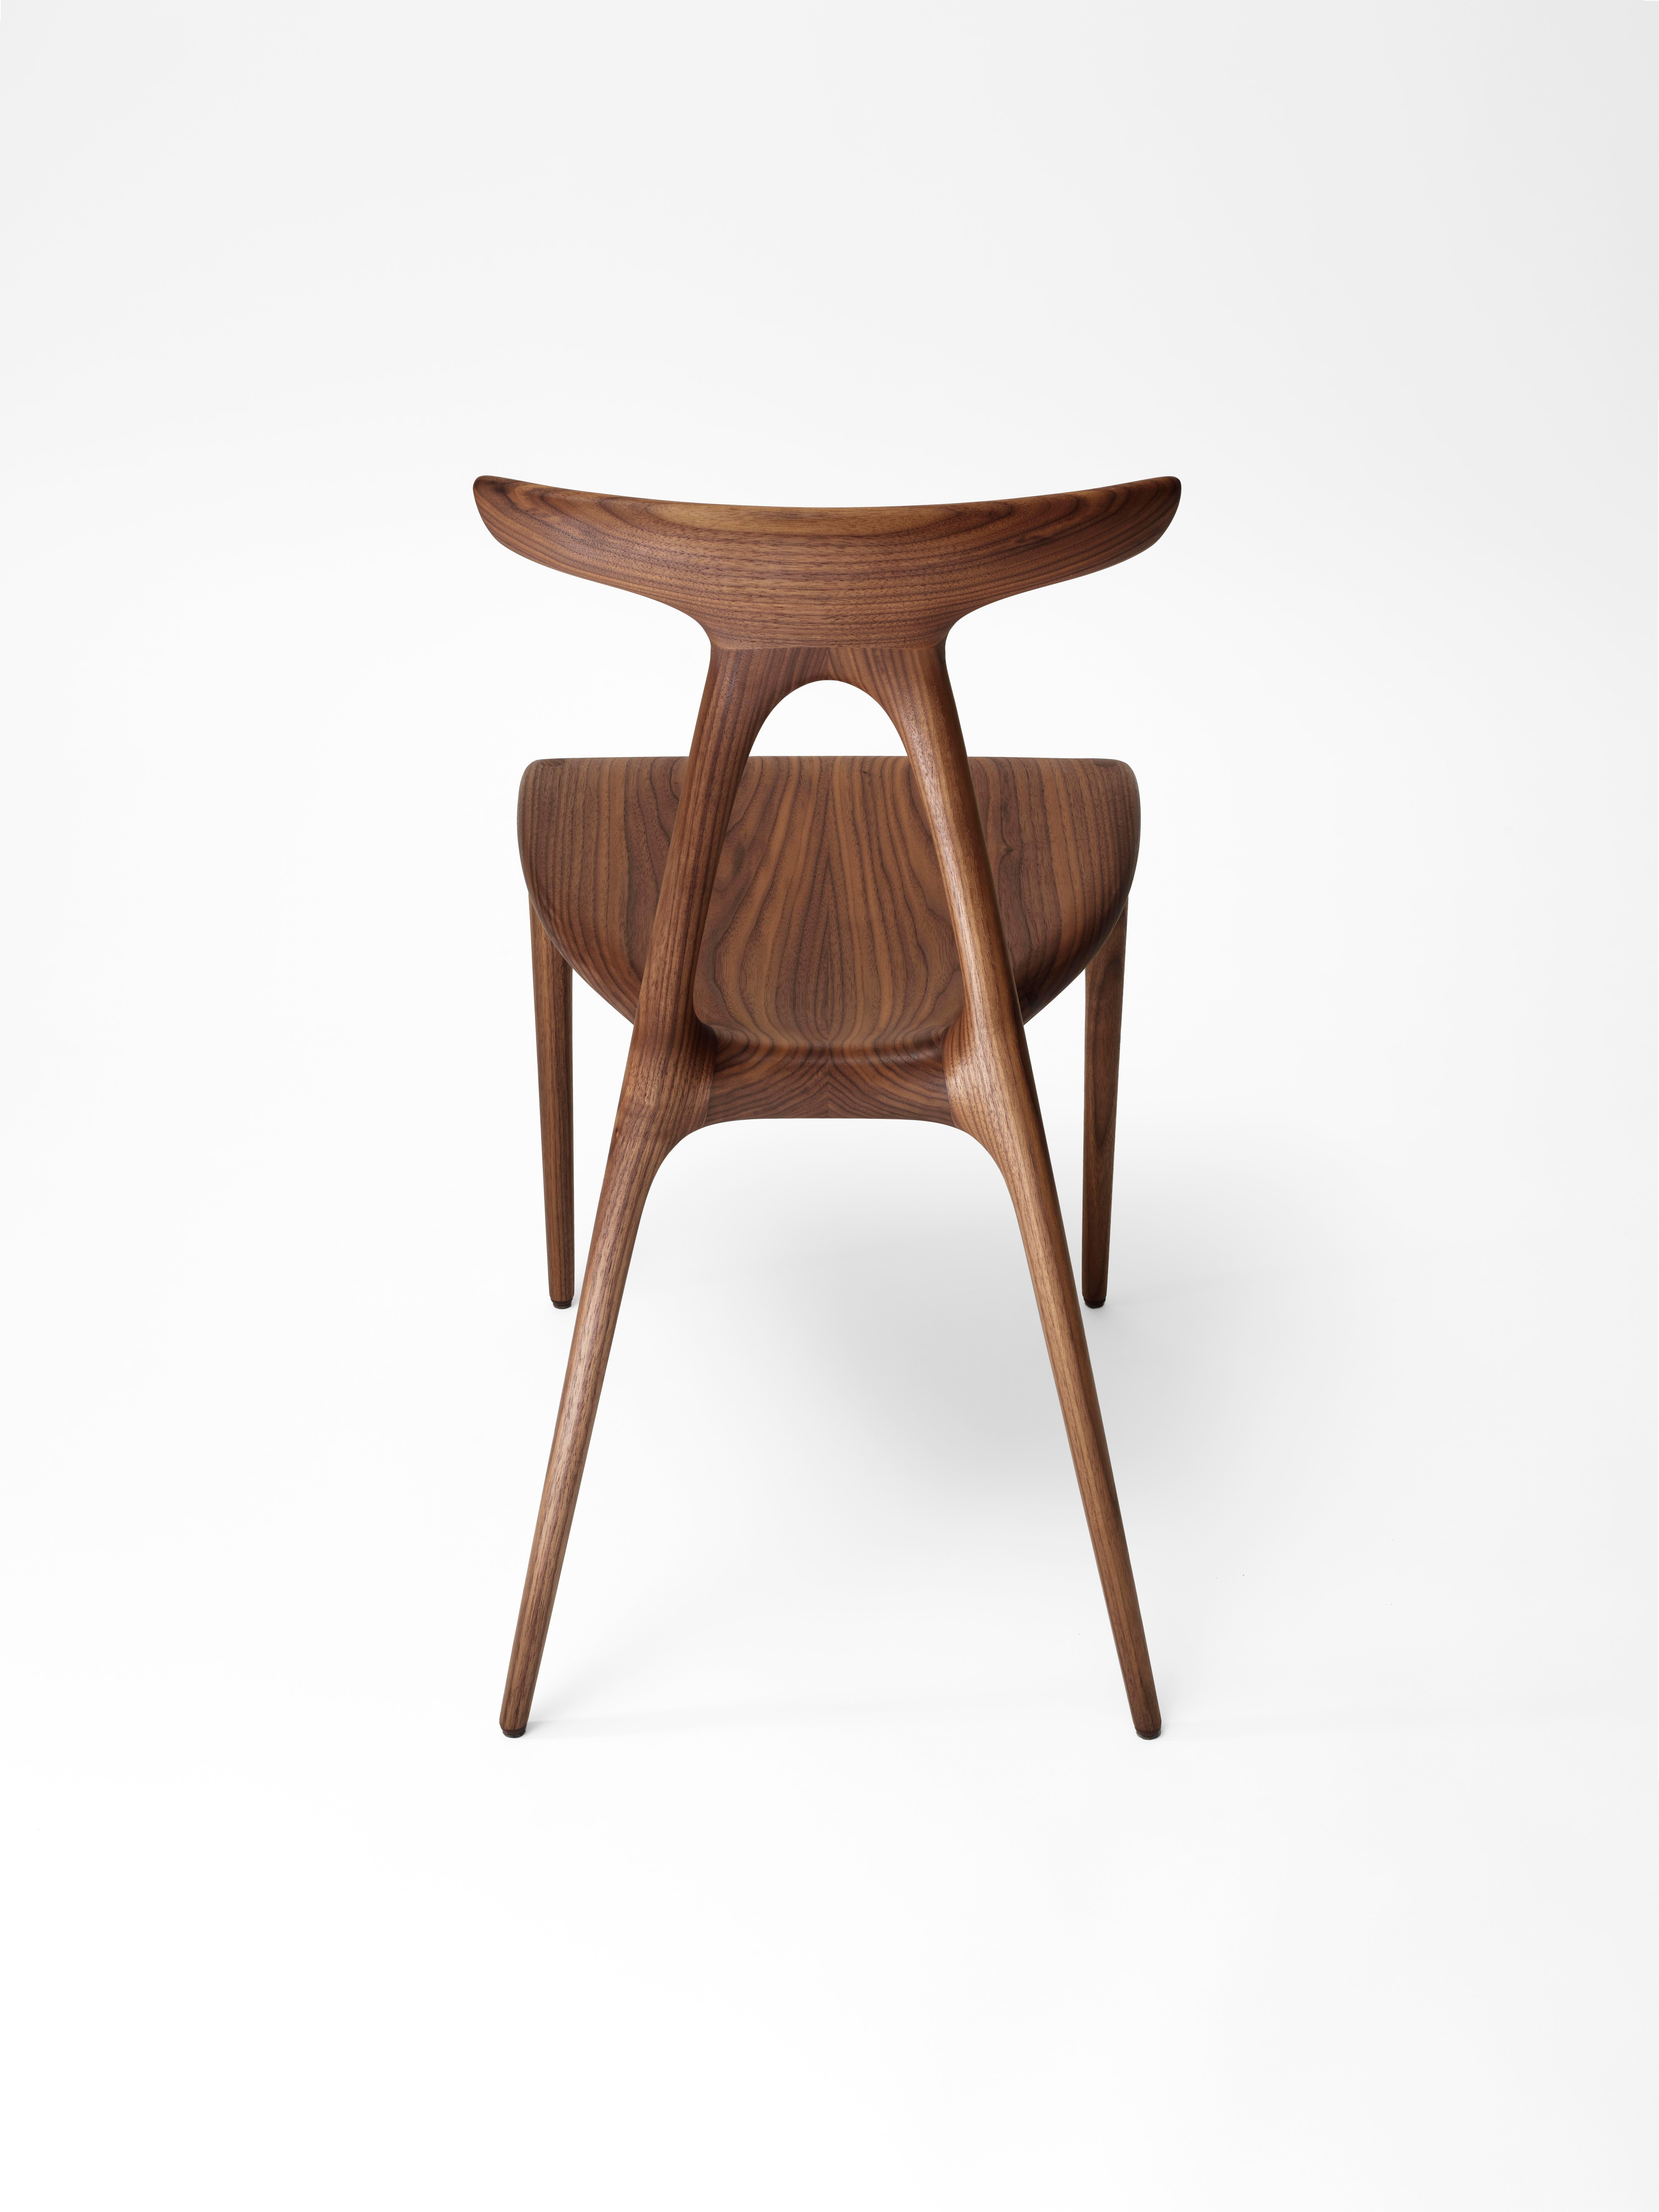 A contemporary solid-wood all-purpose stackable chair produced using the latest production technologies of shaped wooden furniture. The design boasts a strong architectural gesture that gives the chair its inherent strength: the 'A' shaped structure